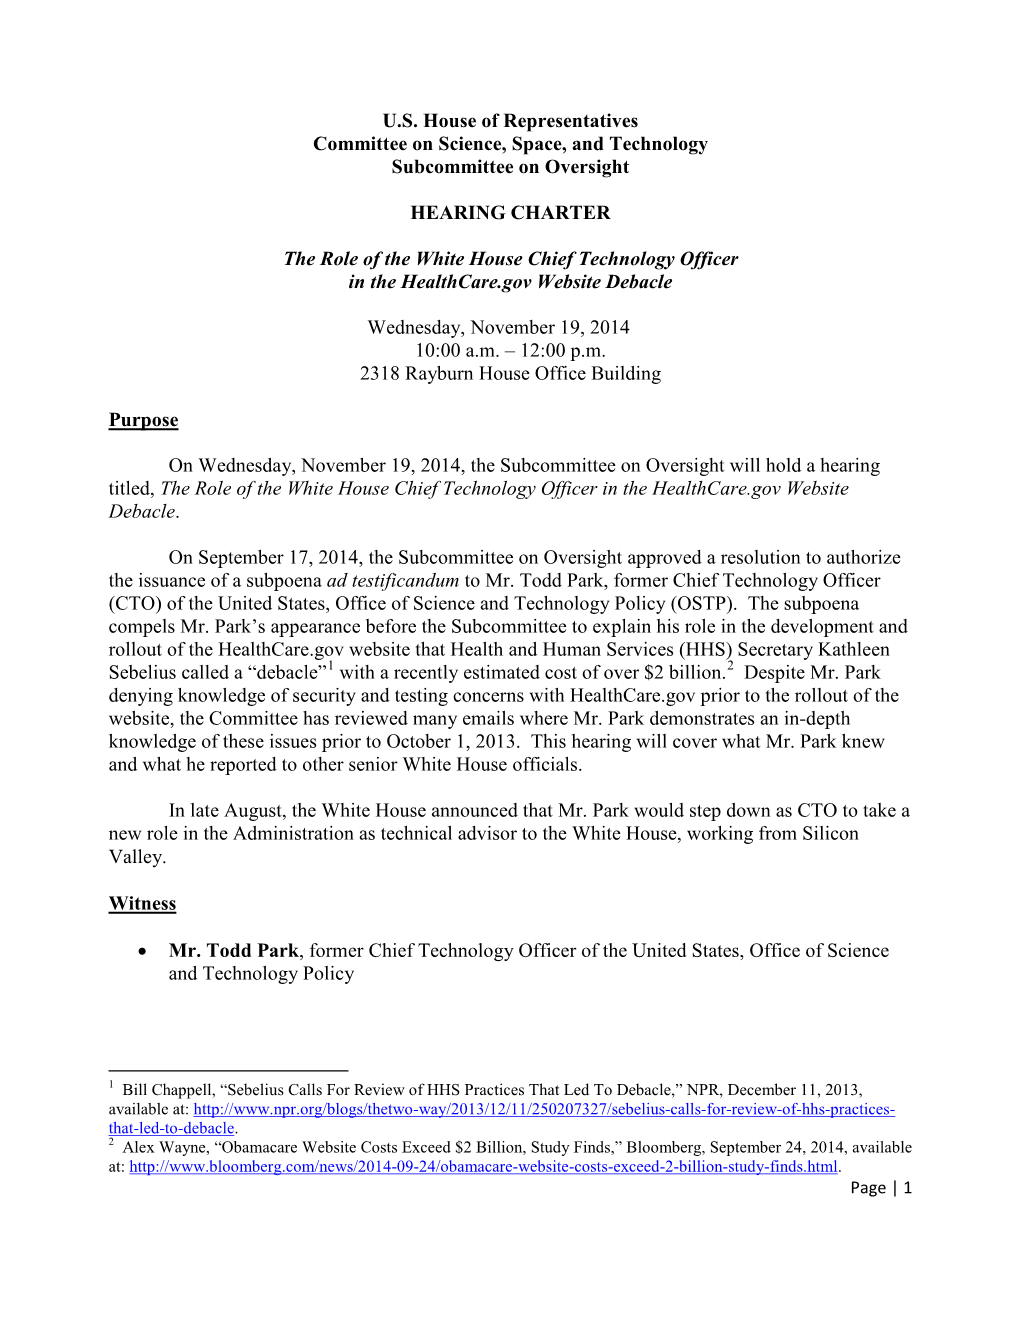 U.S. House of Representatives Committee on Science, Space, and Technology Subcommittee on Oversight